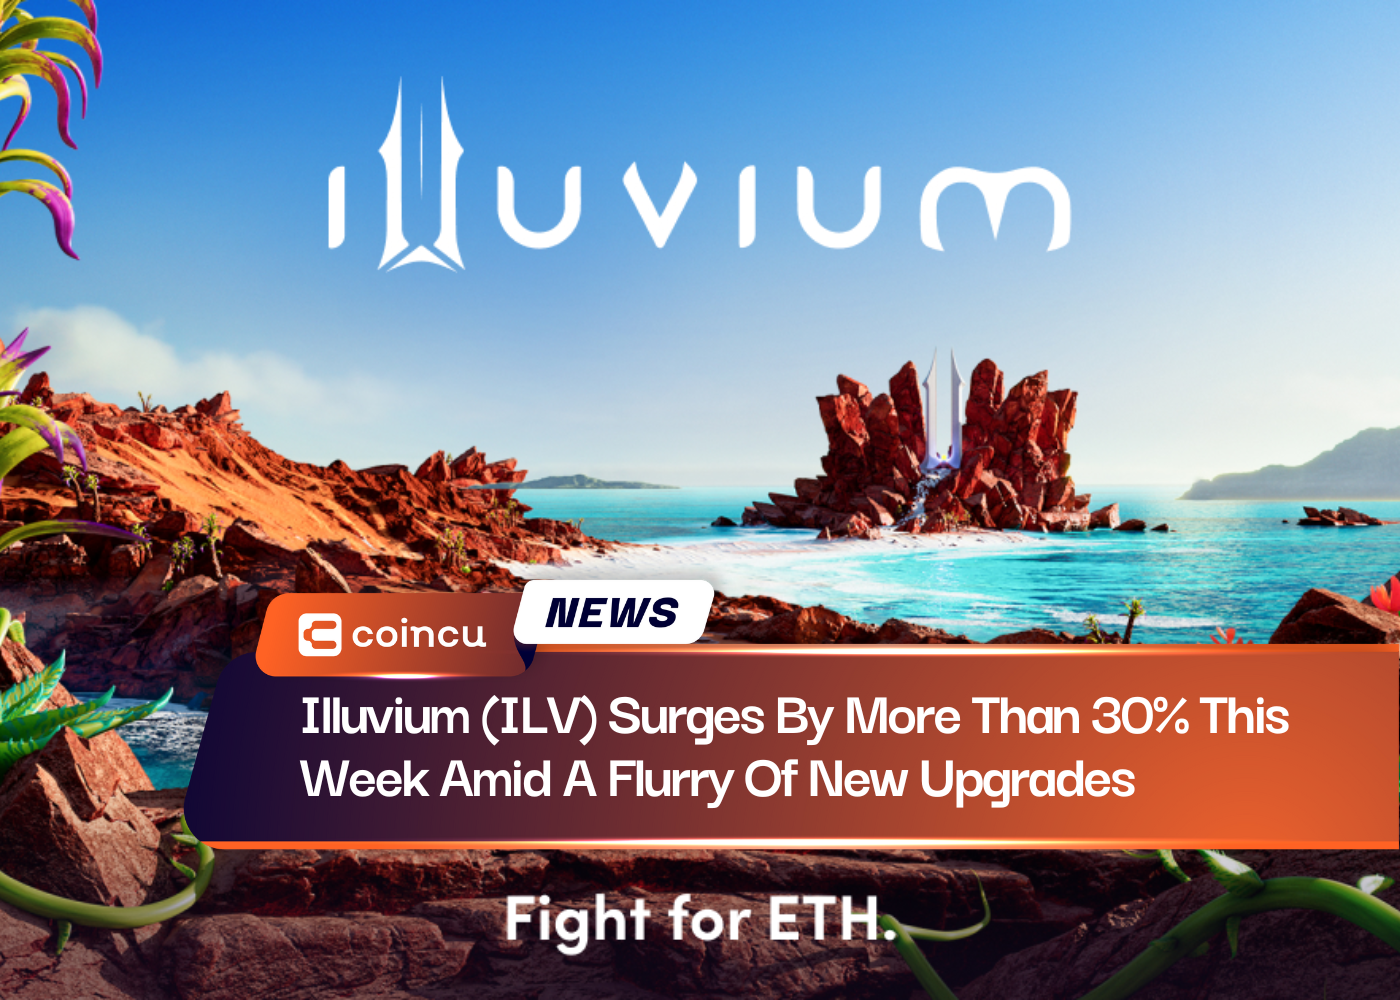 Illuvium (ILV) Surges By More Than 30% This Week Amid A Flurry Of New Upgrades